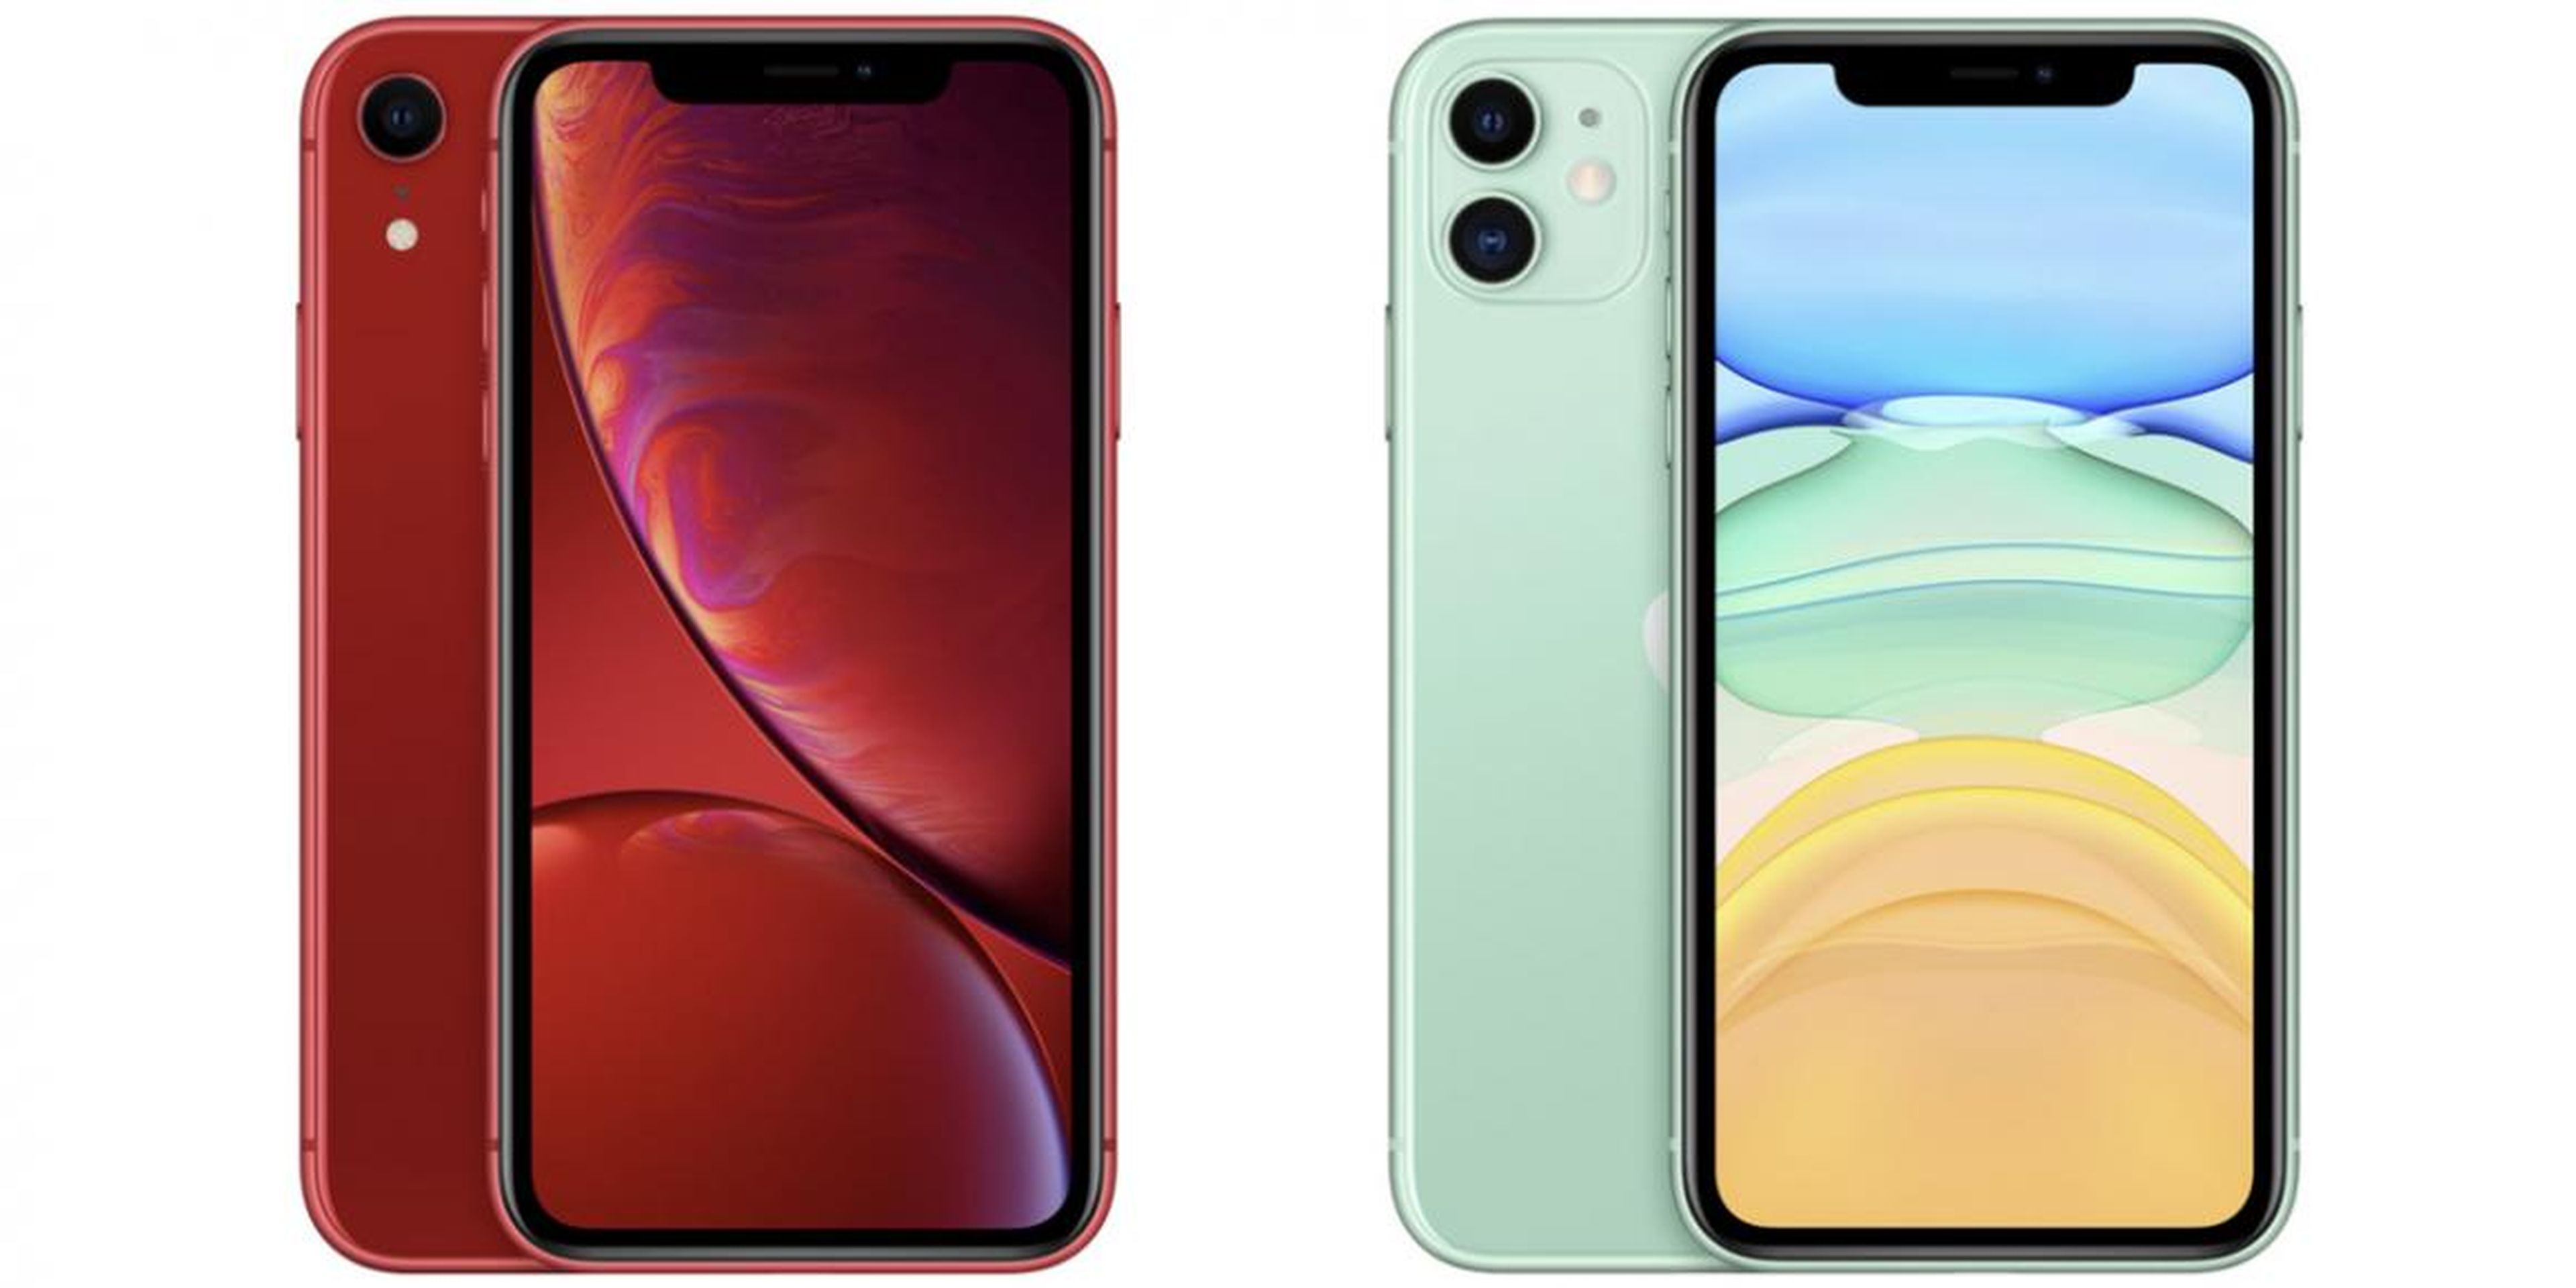 Like so many iPhones before it, the difference between 2018's iPhone XR and 2019's iPhone 11 are incremental.